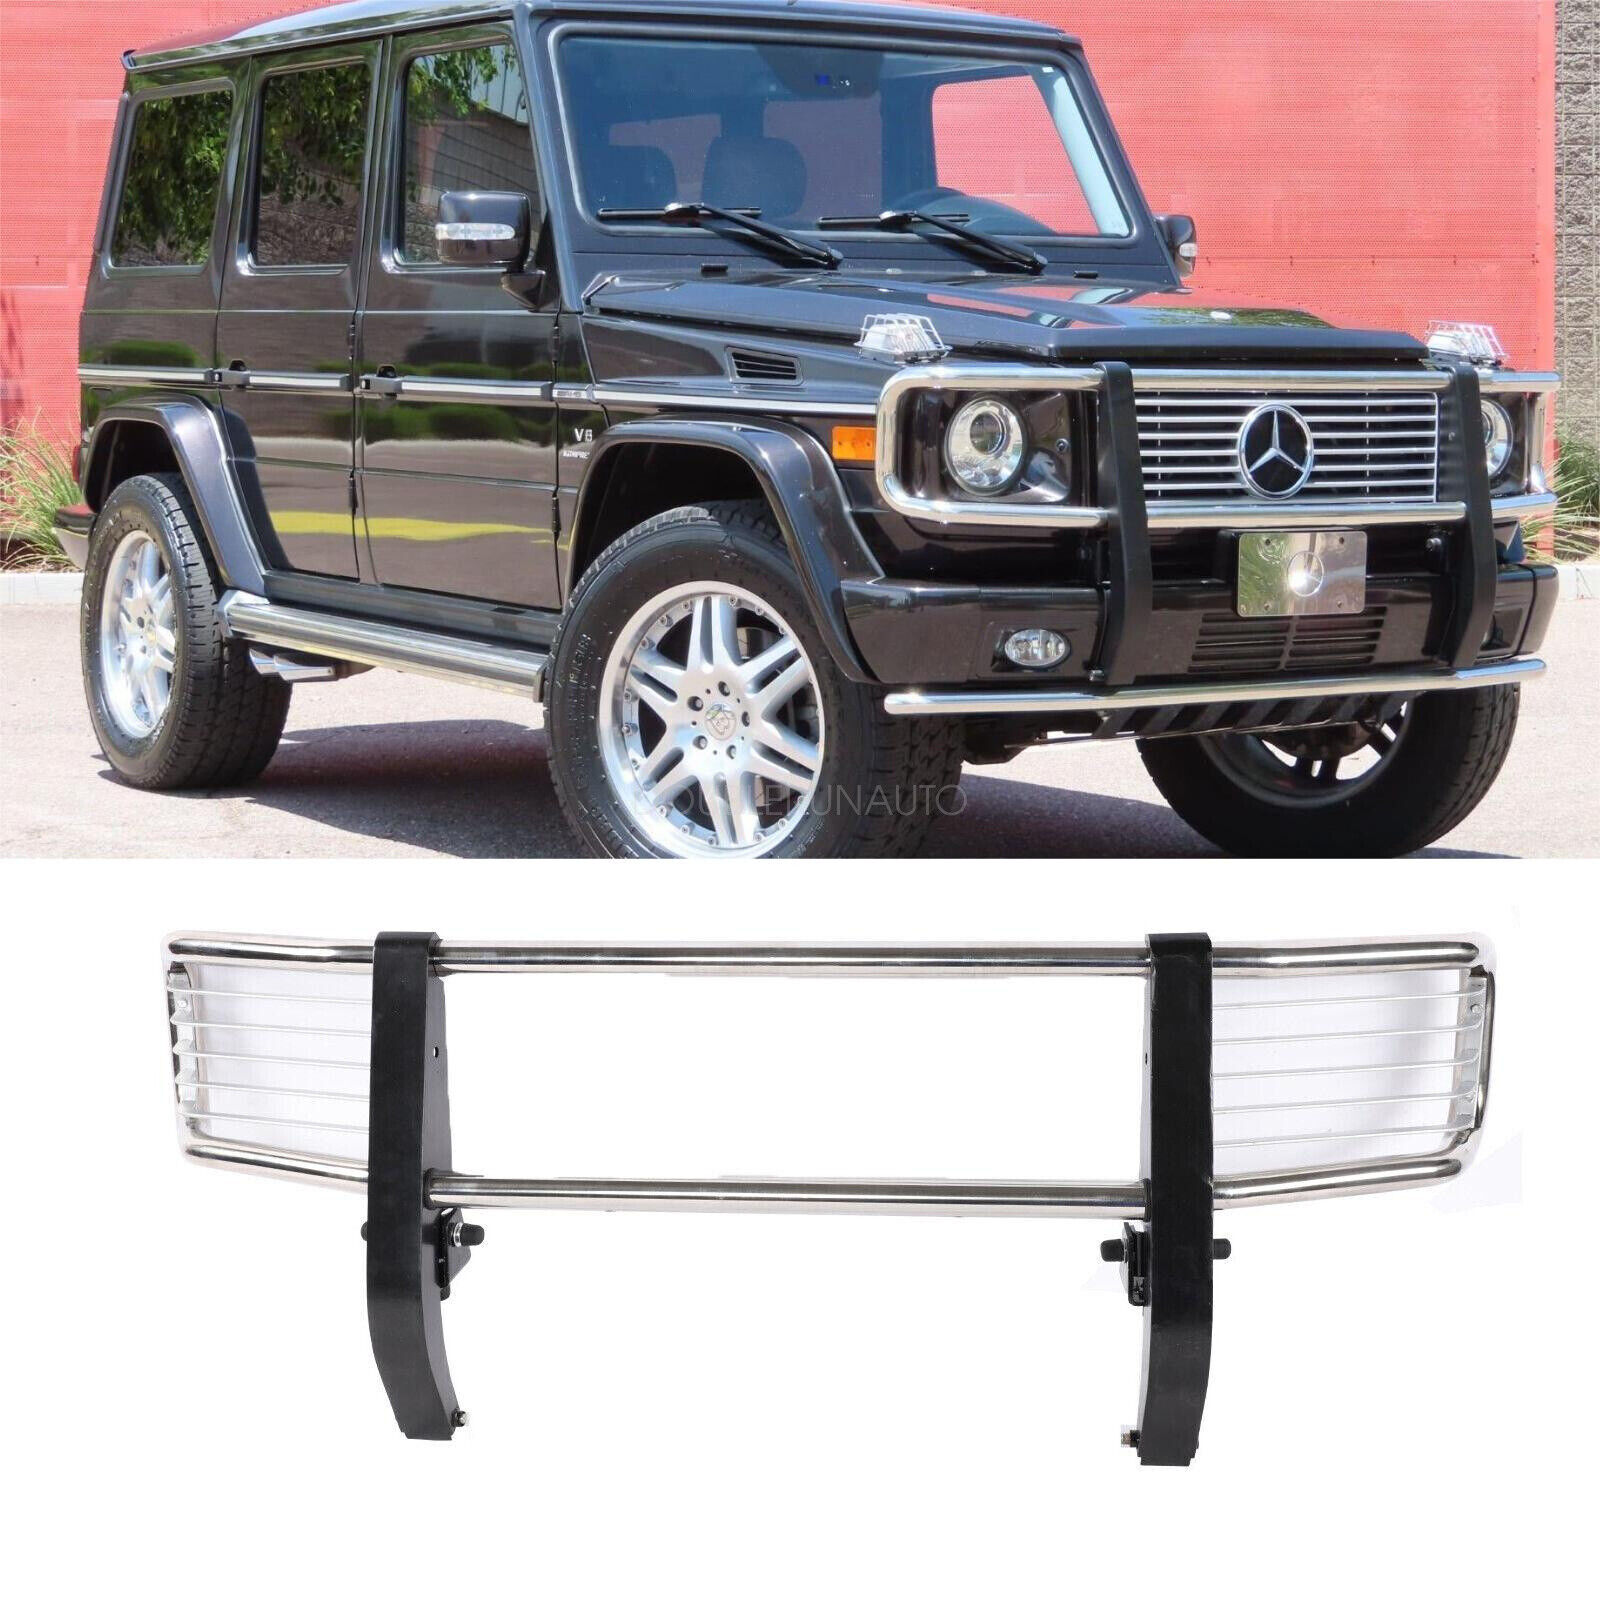 Front Bumper Cover Kit Brush Guard For Mercedes W463 G Class G500 G55 AMG